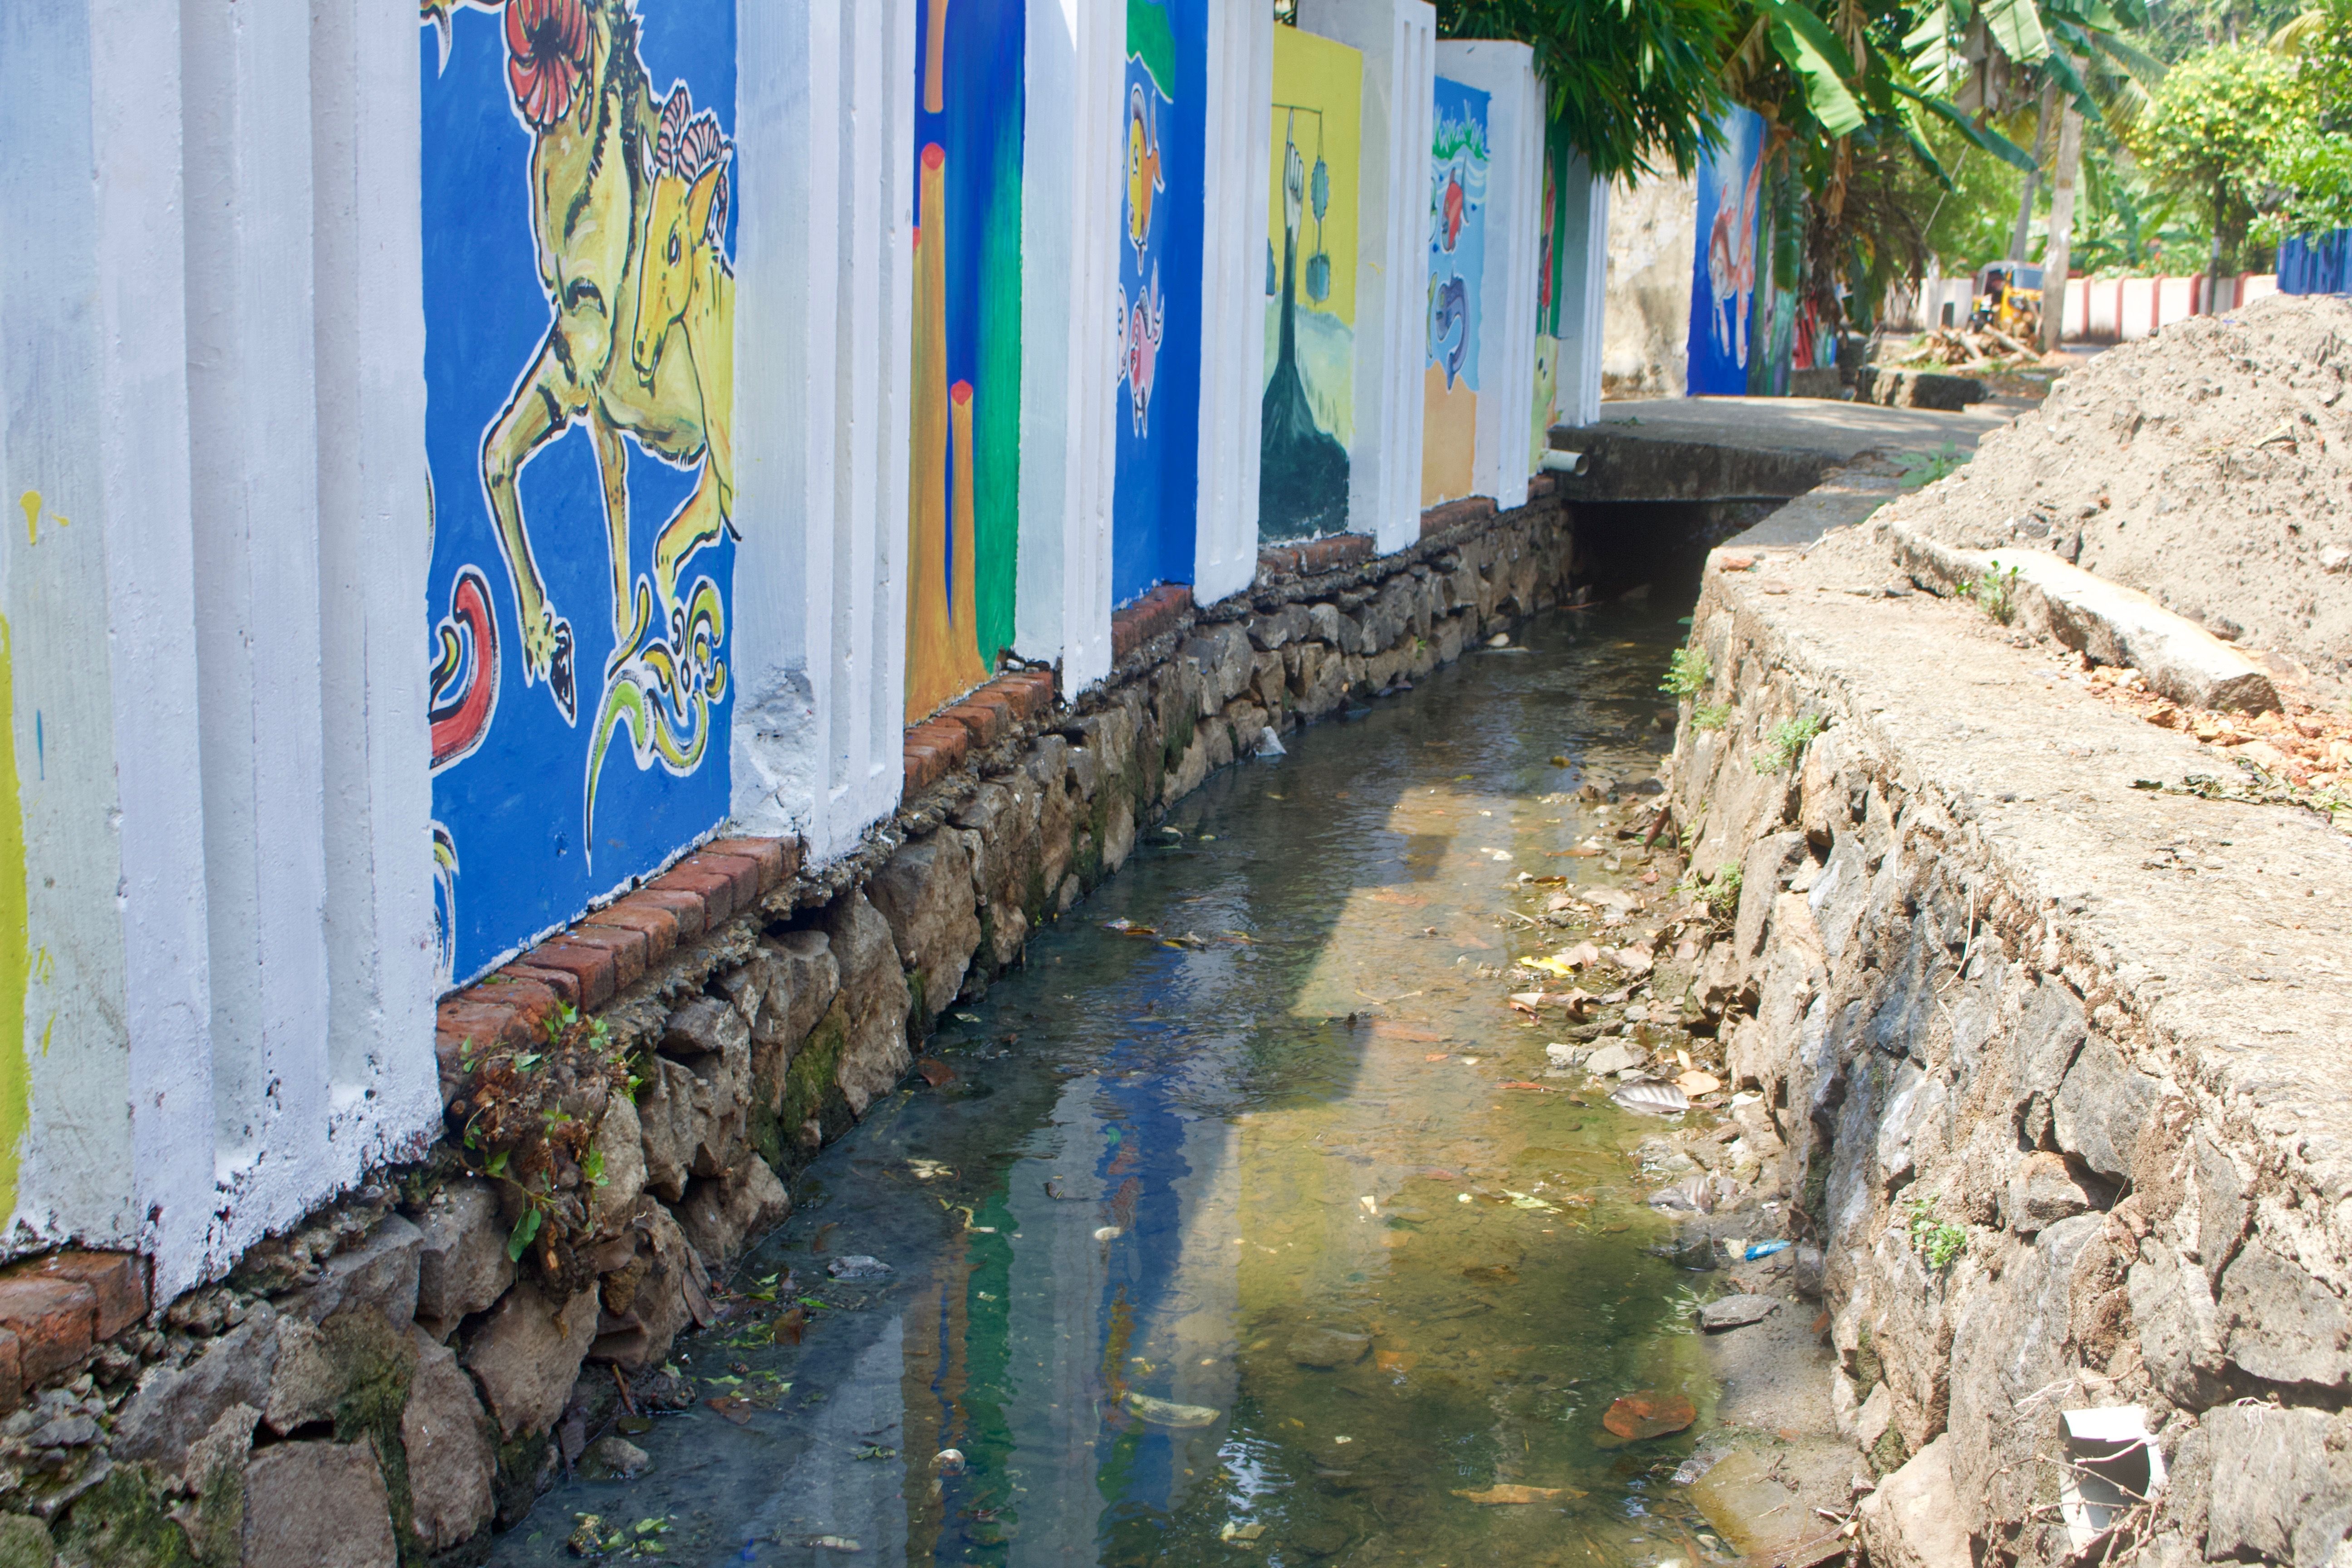 Canalpy and others involved with the rejuvenation project hired local artists to paint murals along the canal encouraging locals to keep their surroundings clear of waste after the canals were cleaned up. Image by Katelyn Weisbrod. India, 2019.